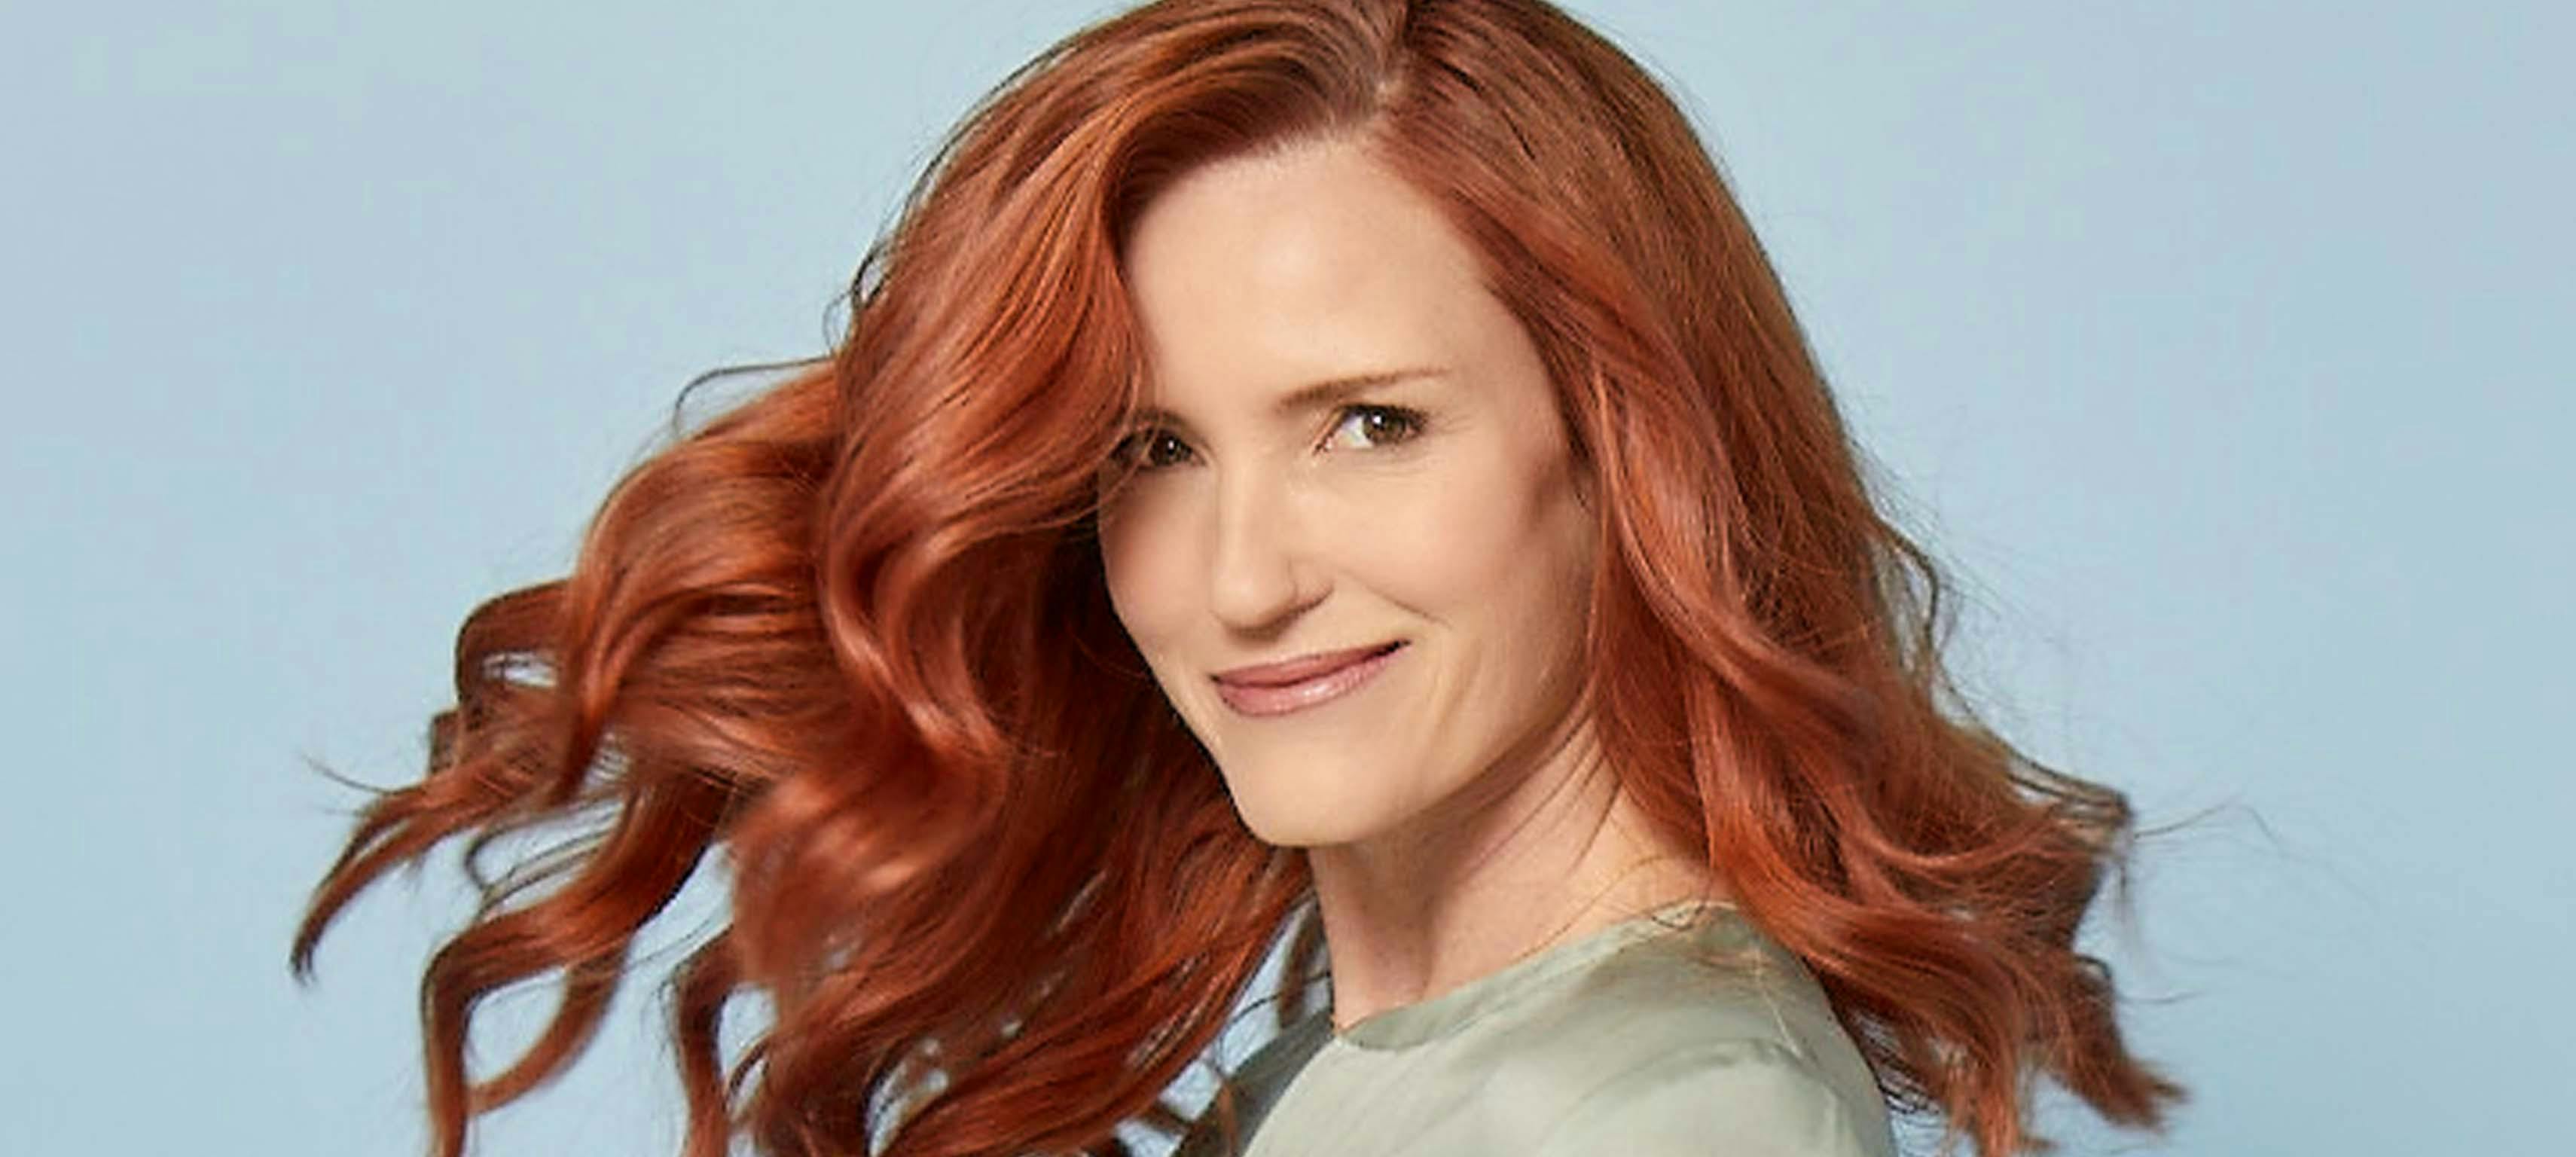 Hair Color 101: The Complete Guide to Red Hair Colors